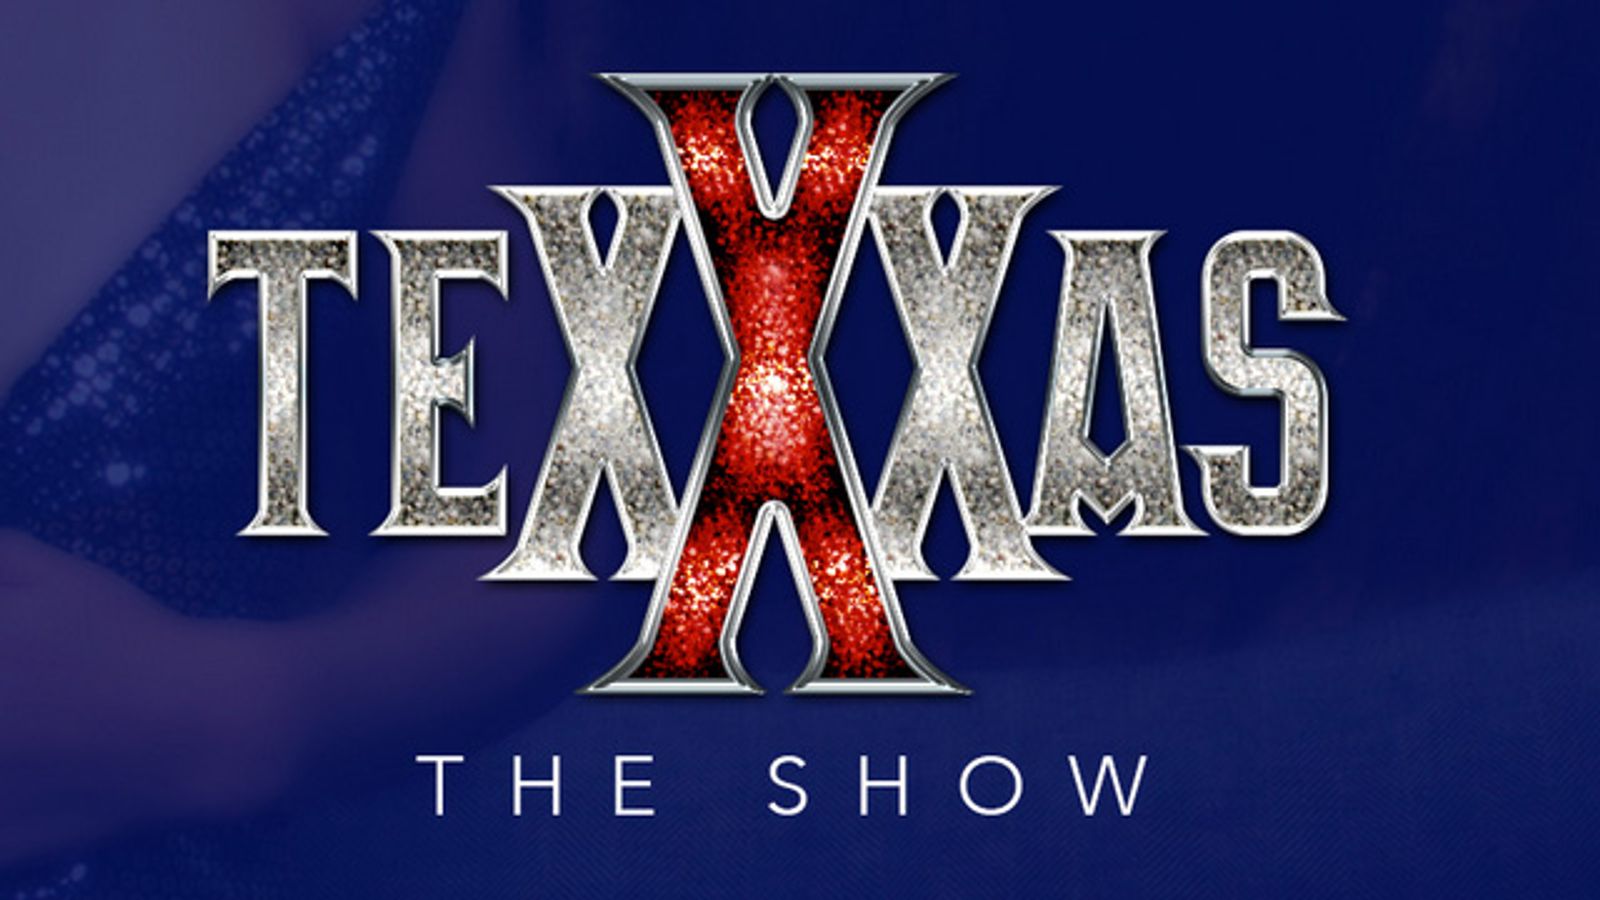 August Dates Announced For TEXXXAS Fan Event